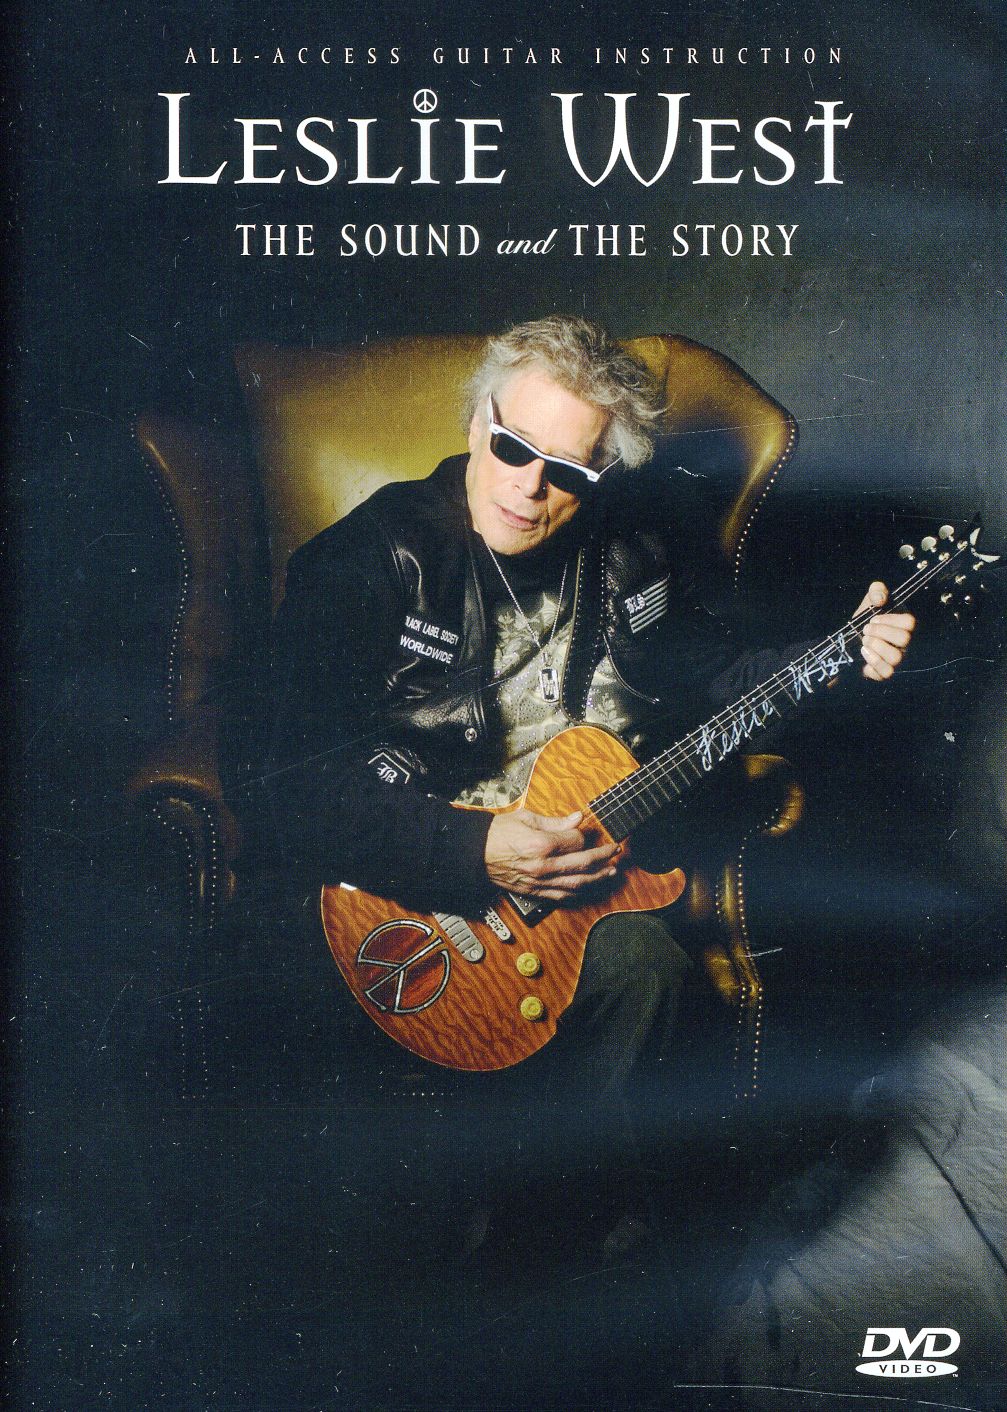 LESLIE WEST: SOUND & THE STORY